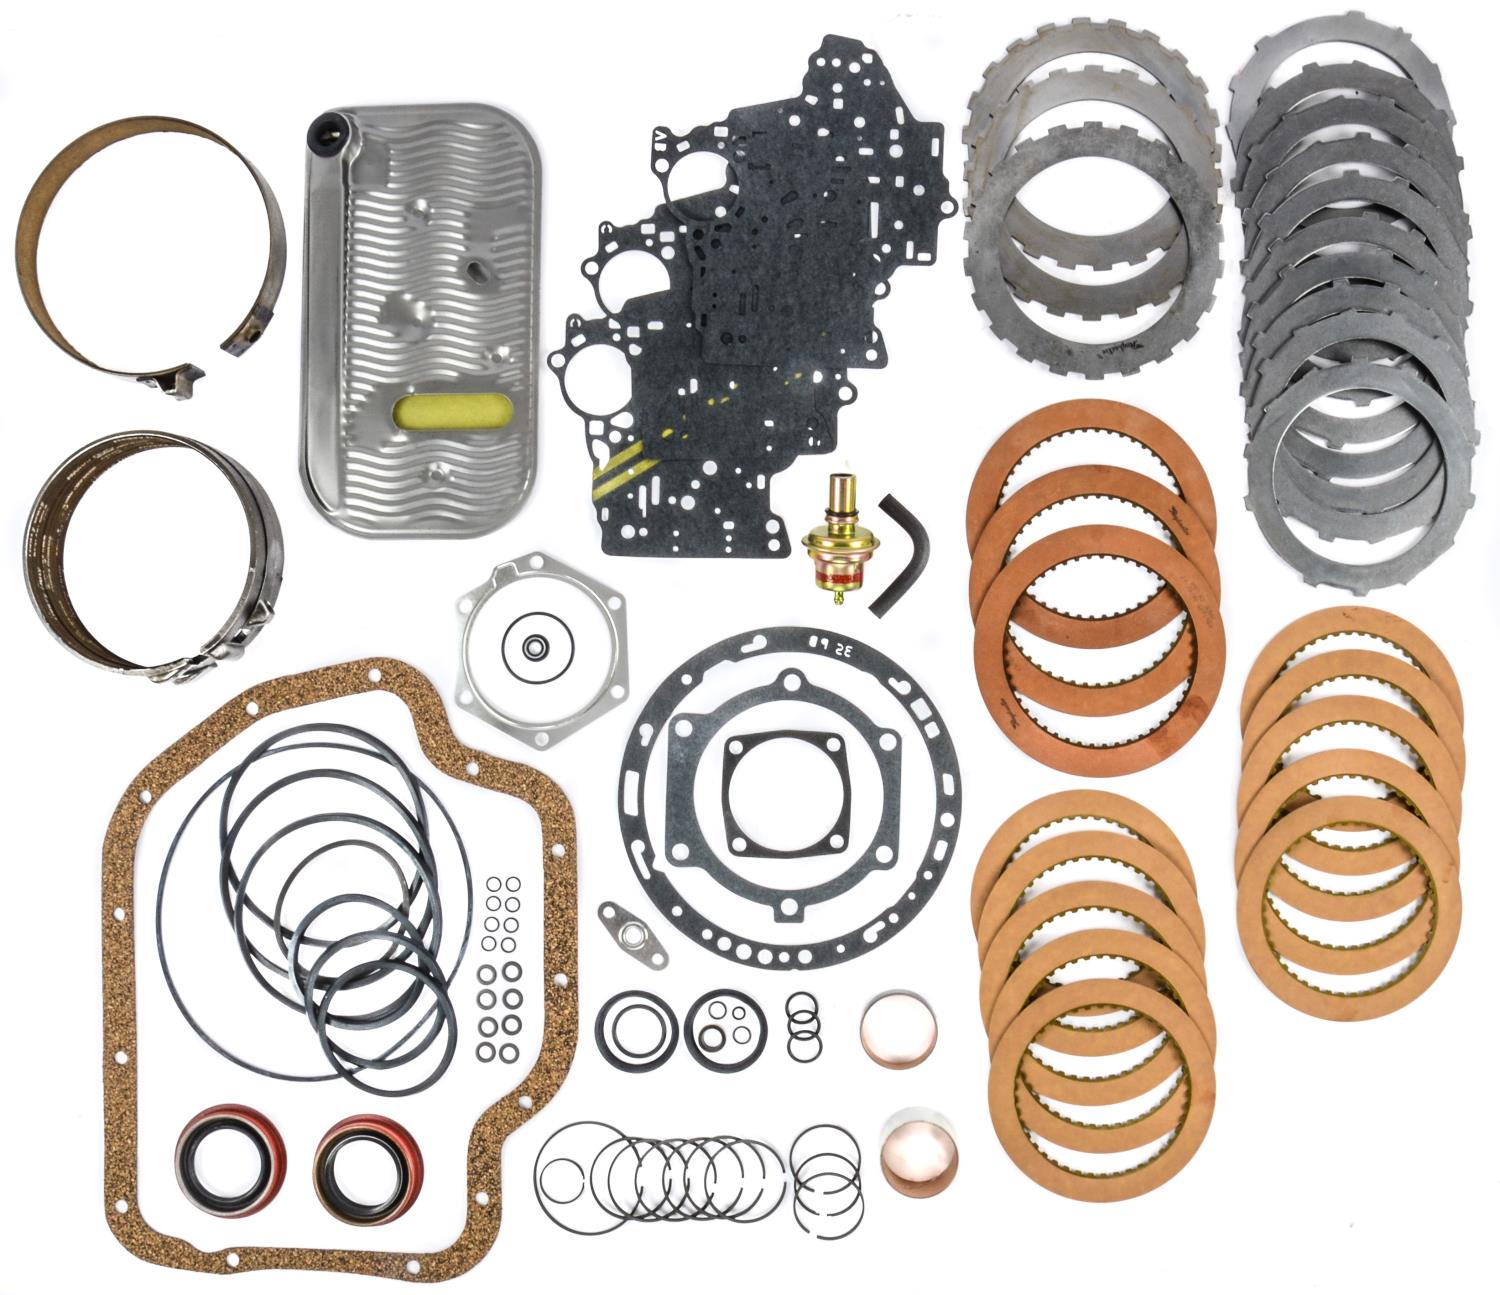 TH400 Turbo 400 Transmission Rebuild Kit 1965 UP with Clutches Gaskets & Seals 